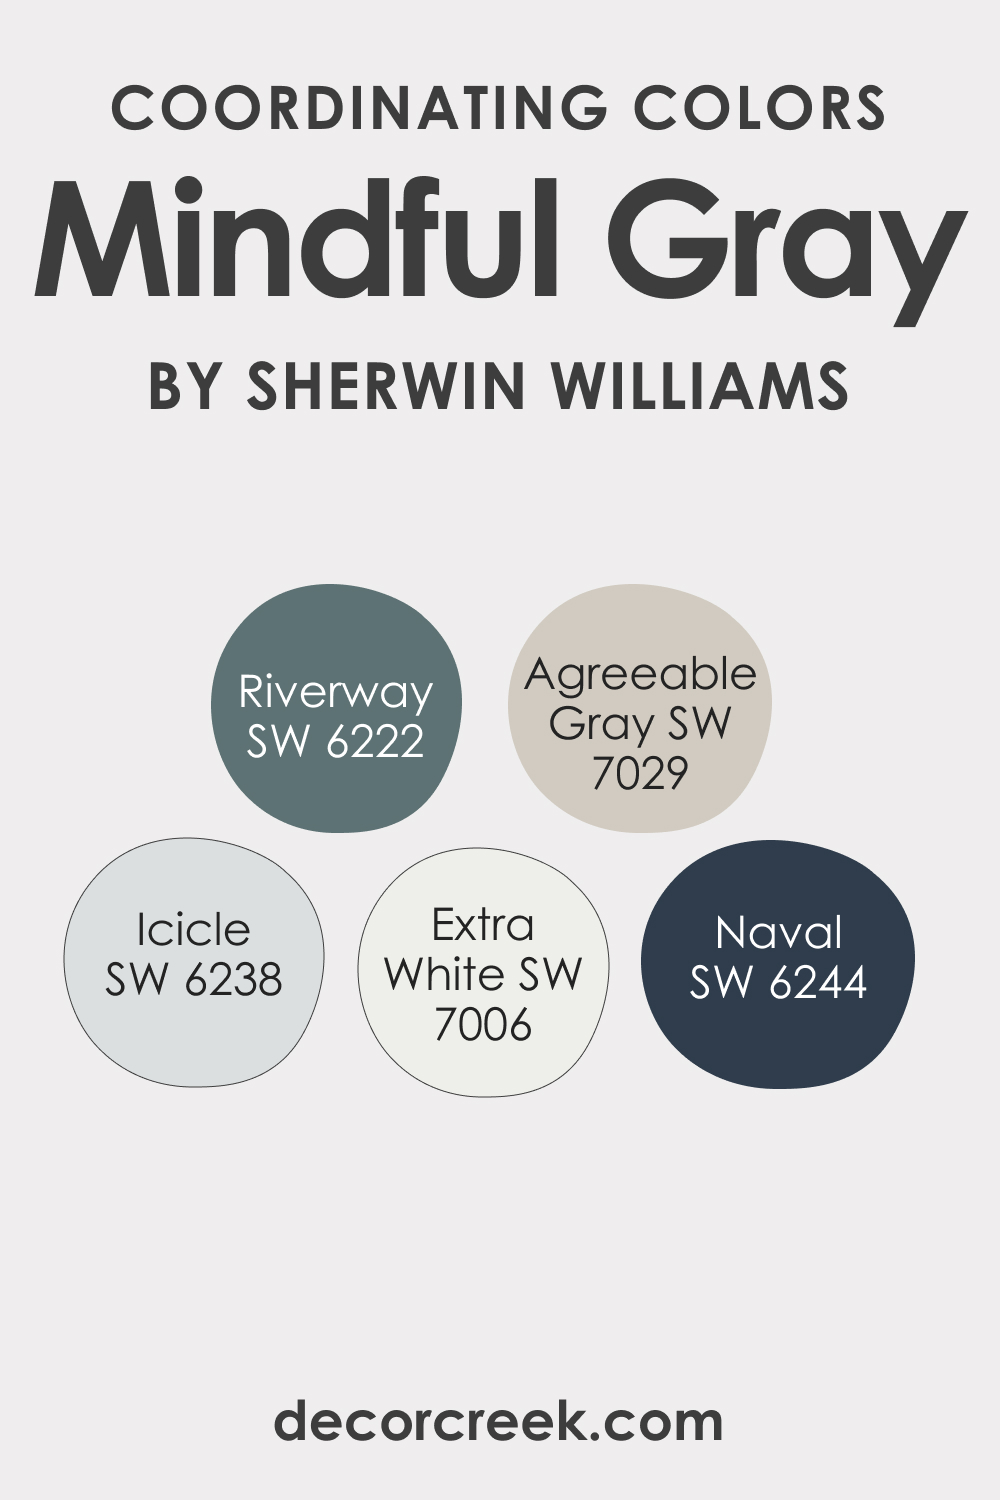 Coordinating Colors of SW 7016 Mindful Gray